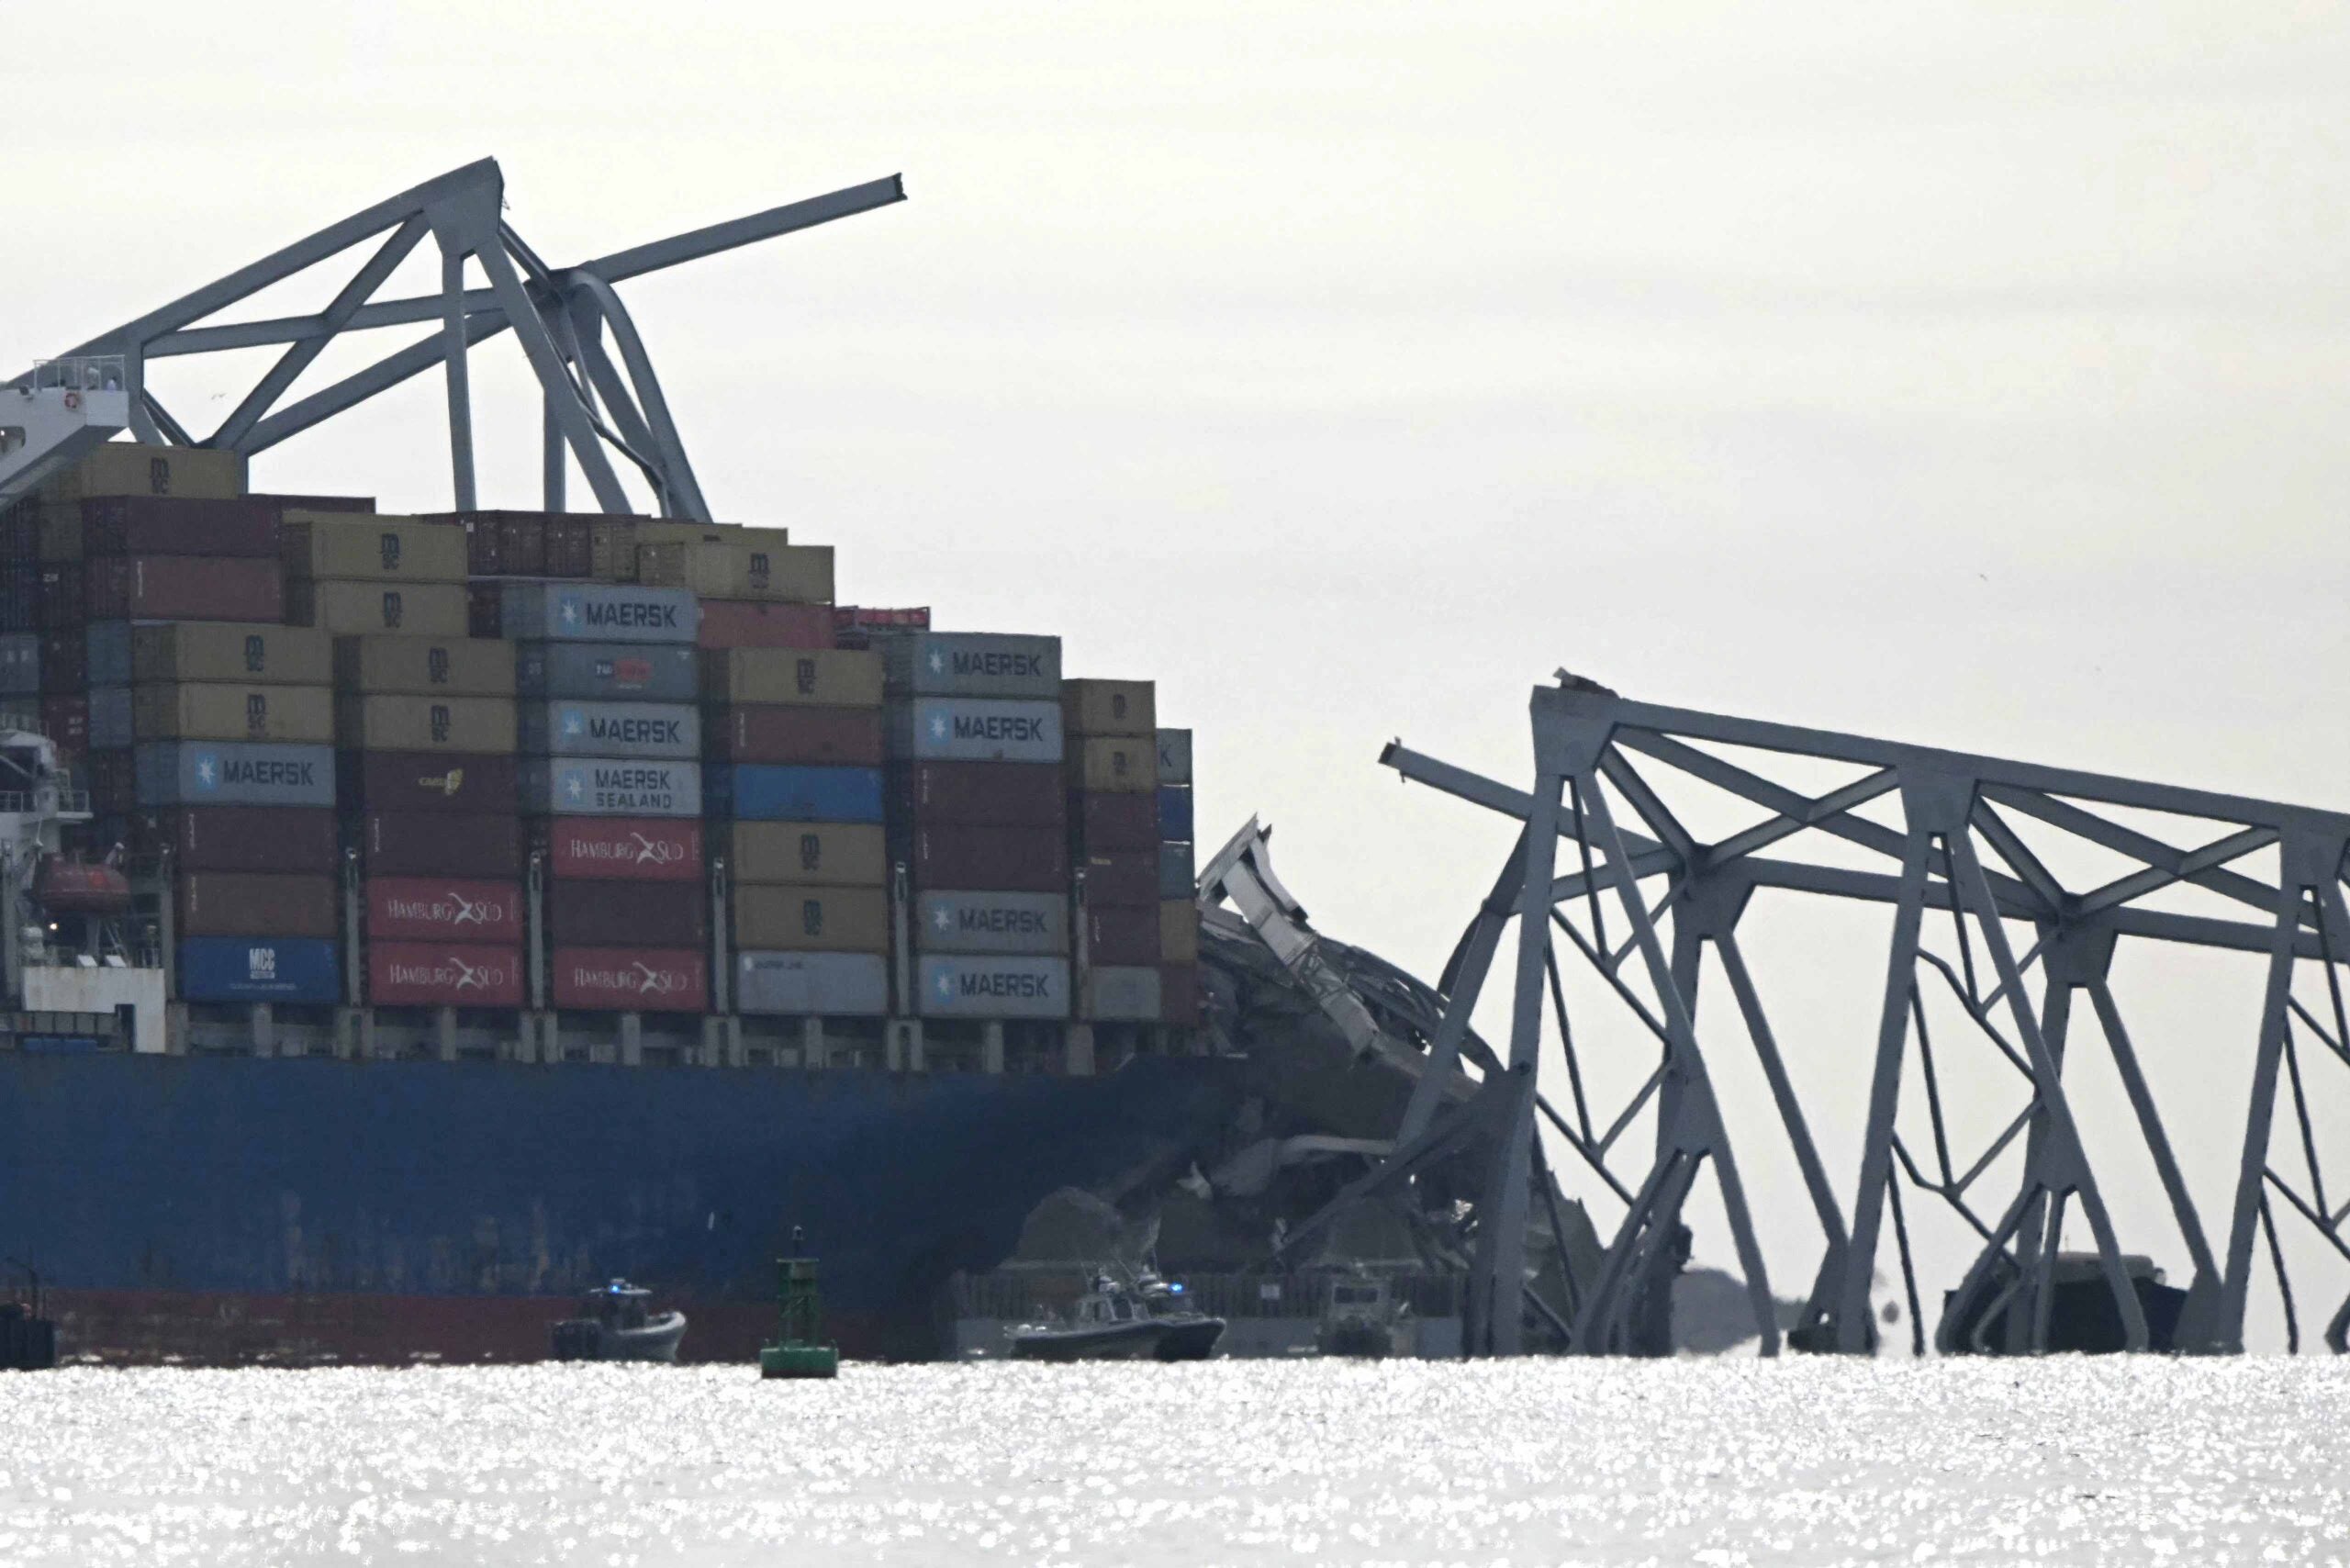 The steel frame of the Francis Scott Key Bridge sits on top of the container ship Dali after the bridge collapsed, Baltimore, Maryland, on March 26, 2024. The bridge collapsed early March 26 after being struck by the Singapore-flagged Dali, sending multiple vehicles and people plunging into the frigid harbor below. There was no immediate confirmation of the cause of the disaster, but Baltimore's Police Commissioner Richard Worley said there was "no indication" of terrorism. (Photo by Mandel NGAN / AFP)